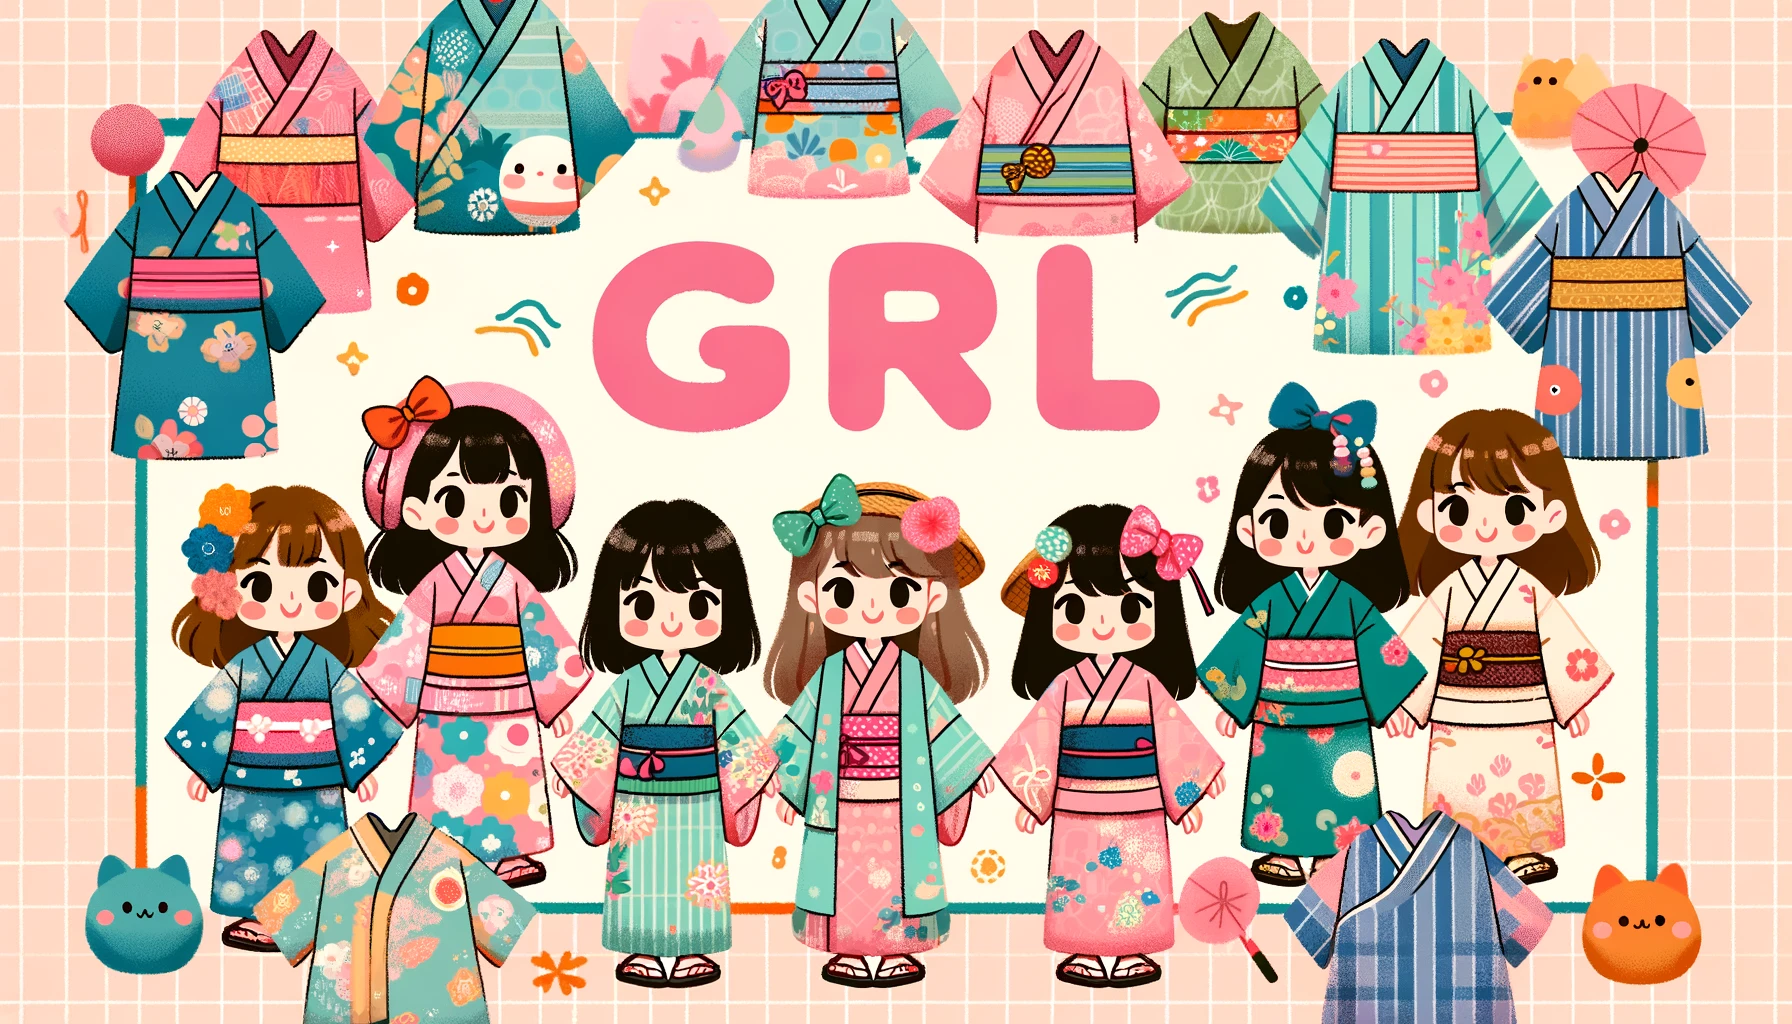 An image showcasing the cute designs of GRL yukatas. The image features various adorable and stylish yukata designs with bright colors and playful patterns. The background includes models wearing these yukatas in a charming setting, with 'GRL' prominently displayed.